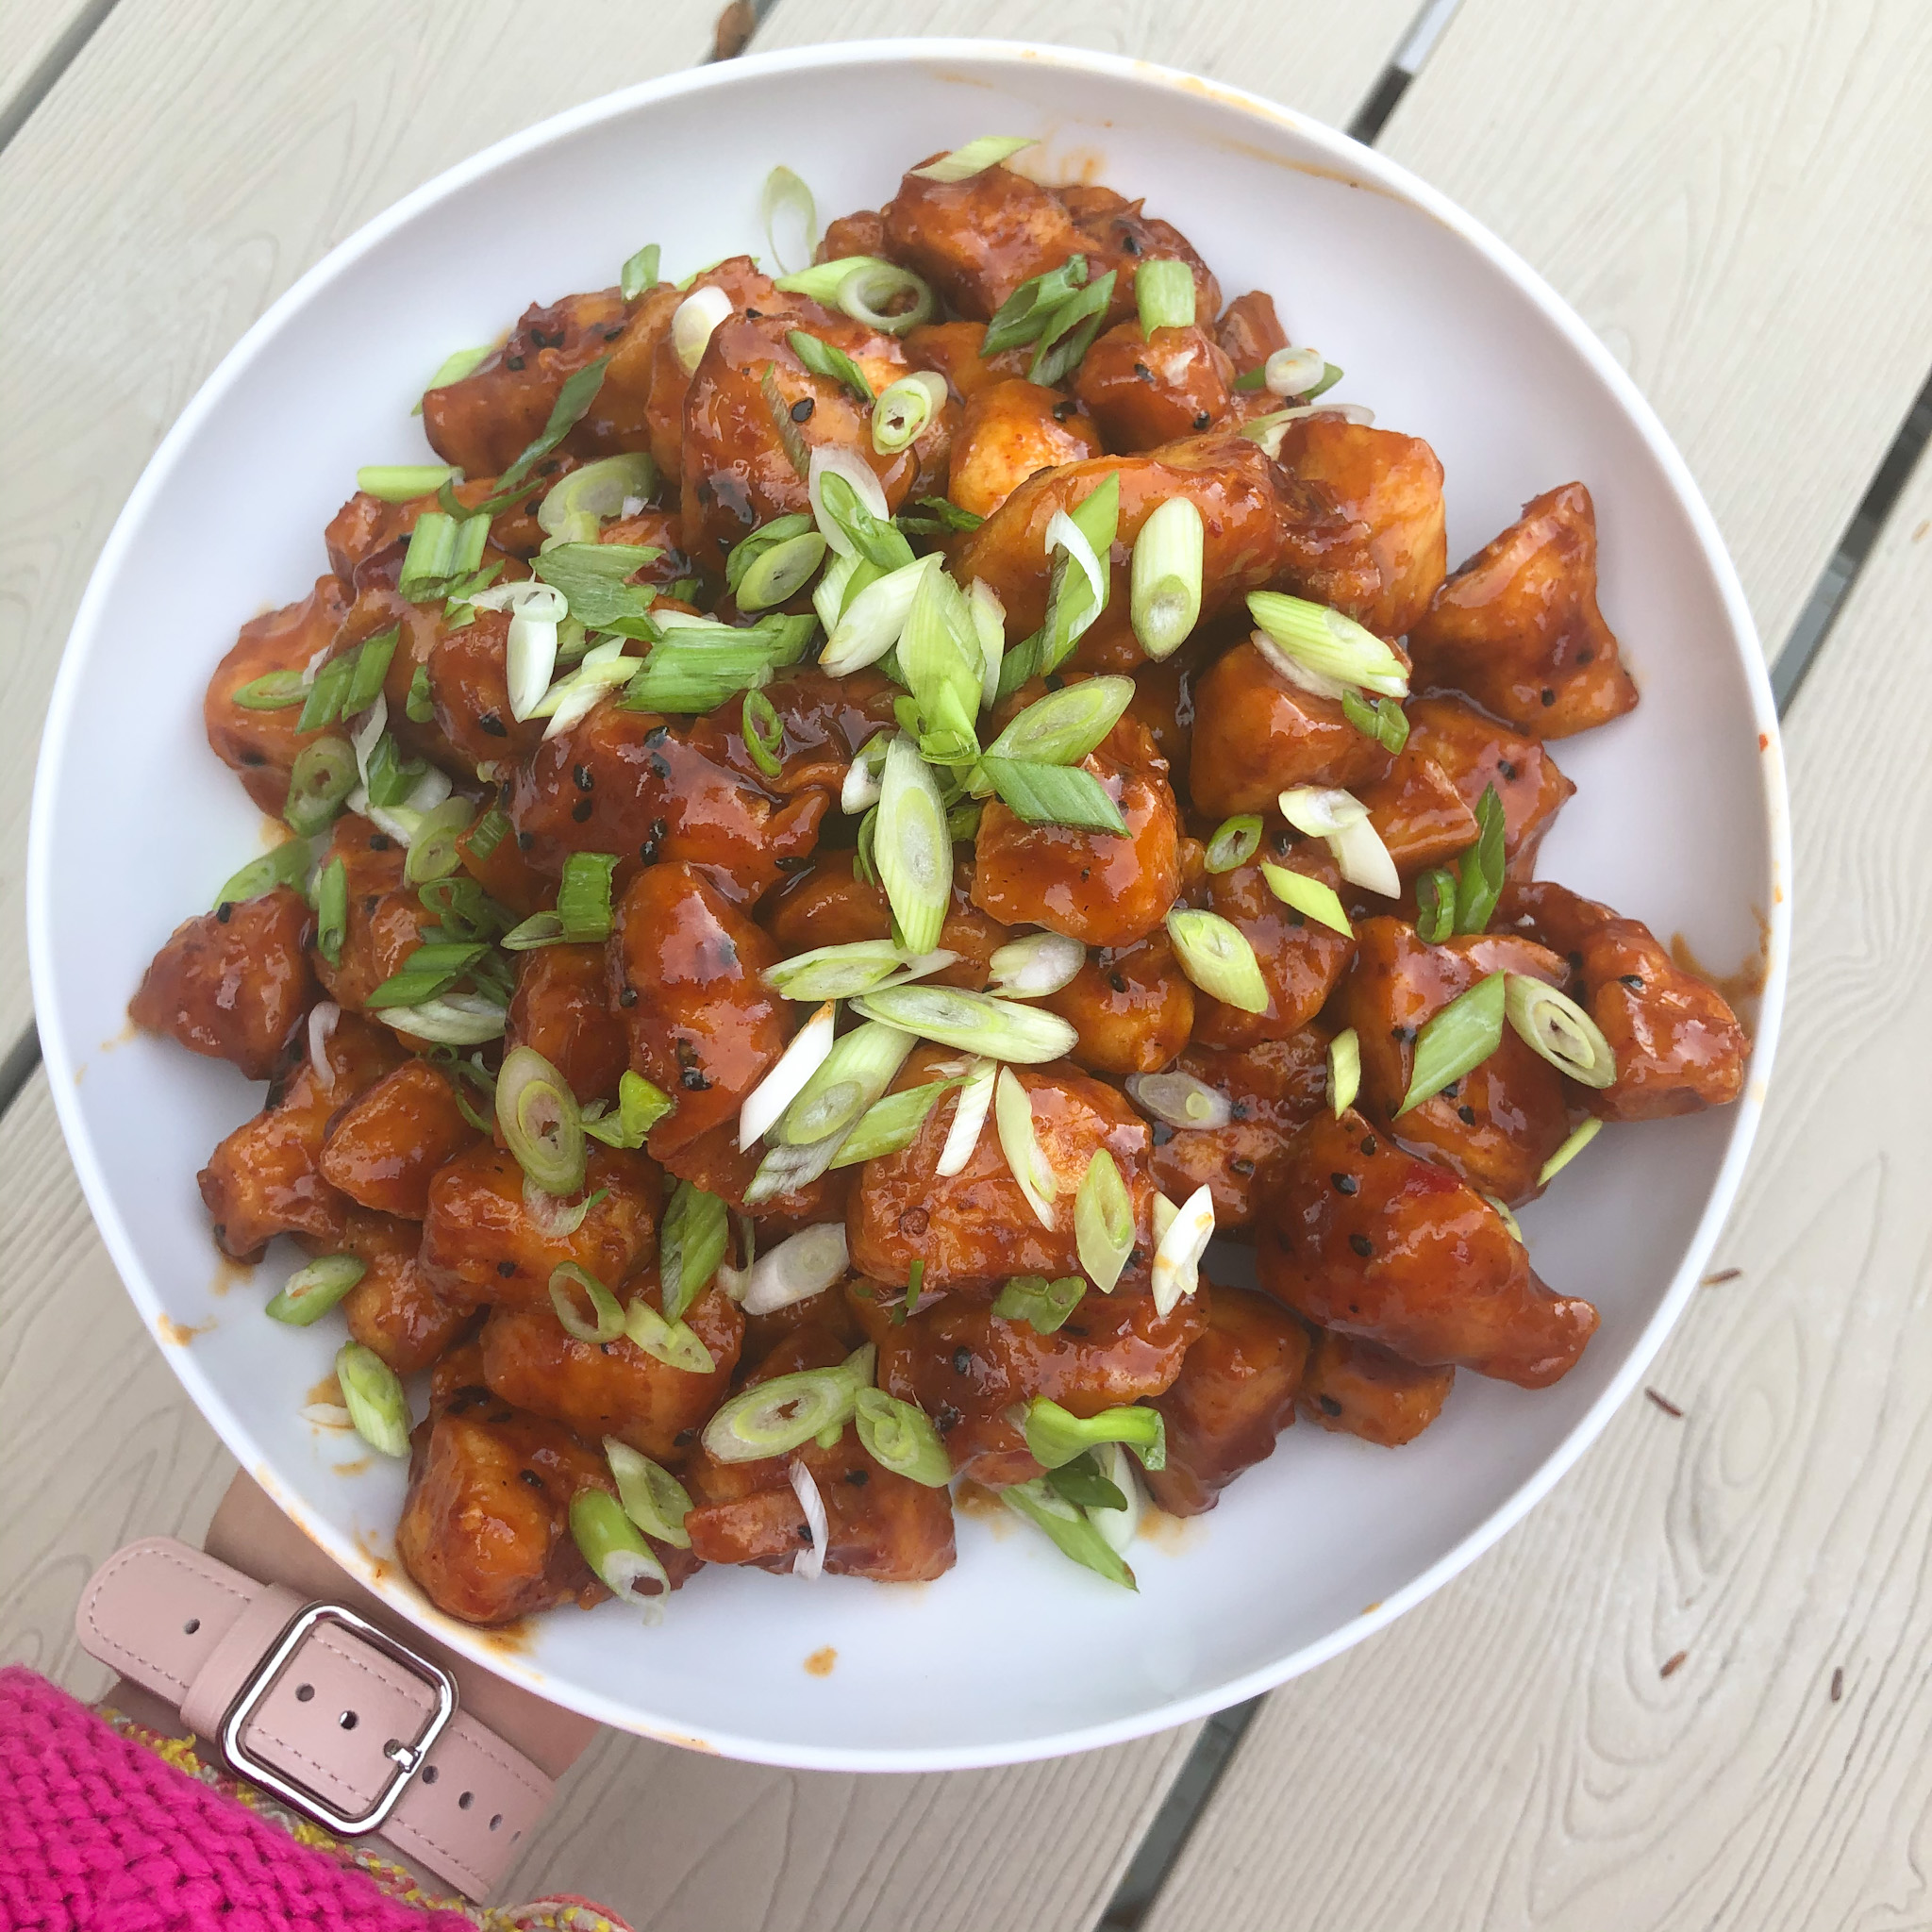 the finished plate of gluten free korean fried chicken with scallions